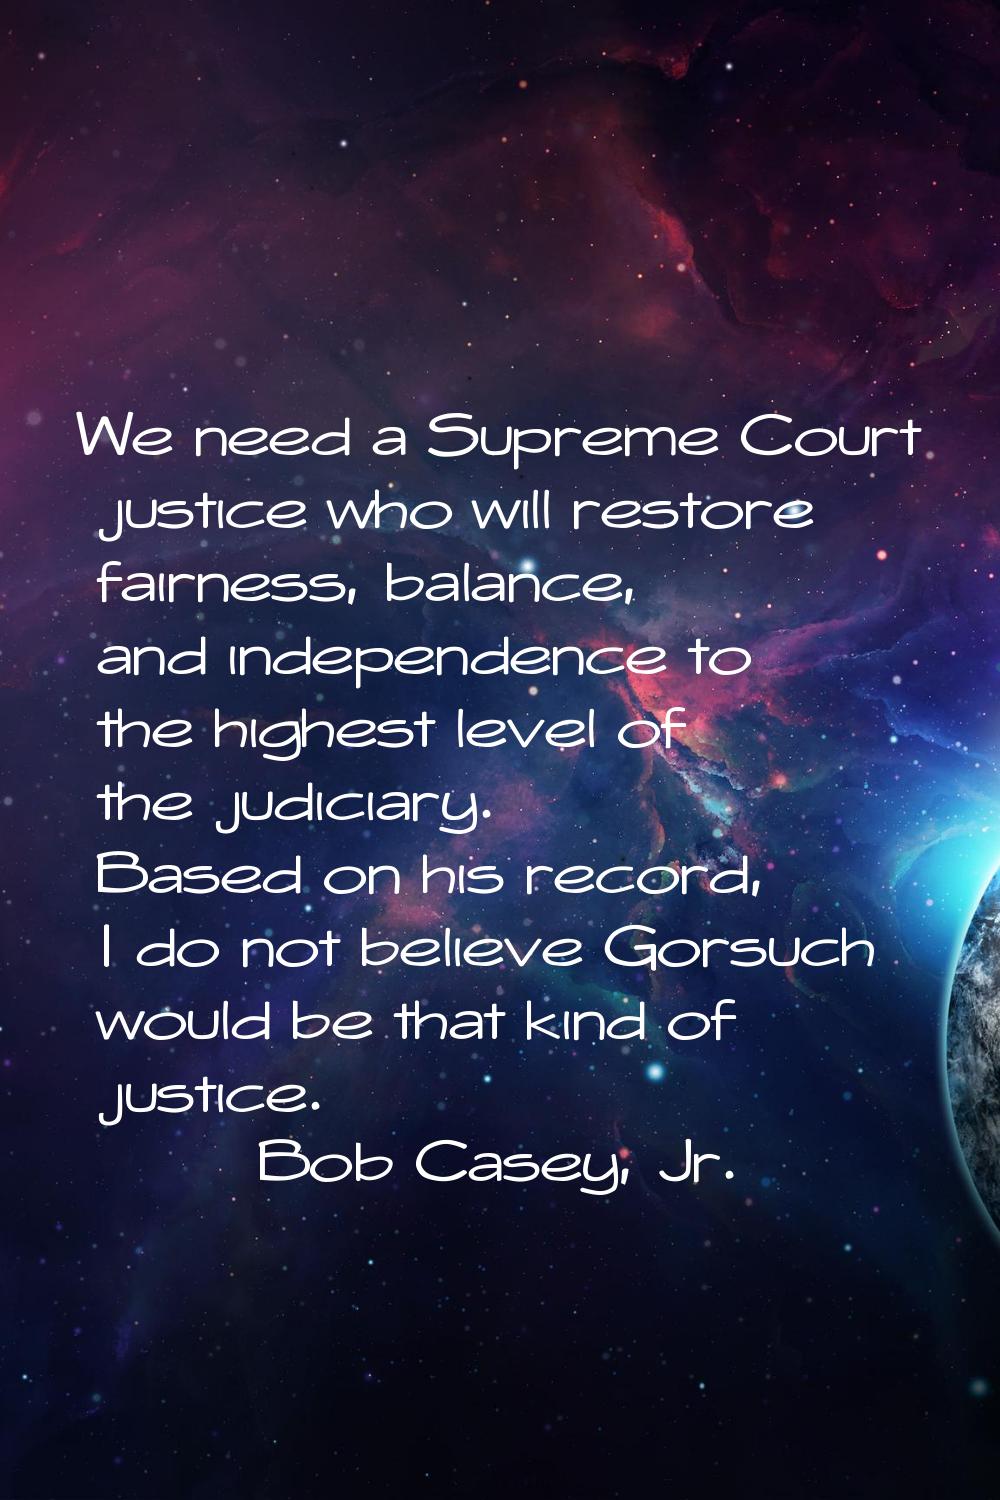 We need a Supreme Court justice who will restore fairness, balance, and independence to the highest